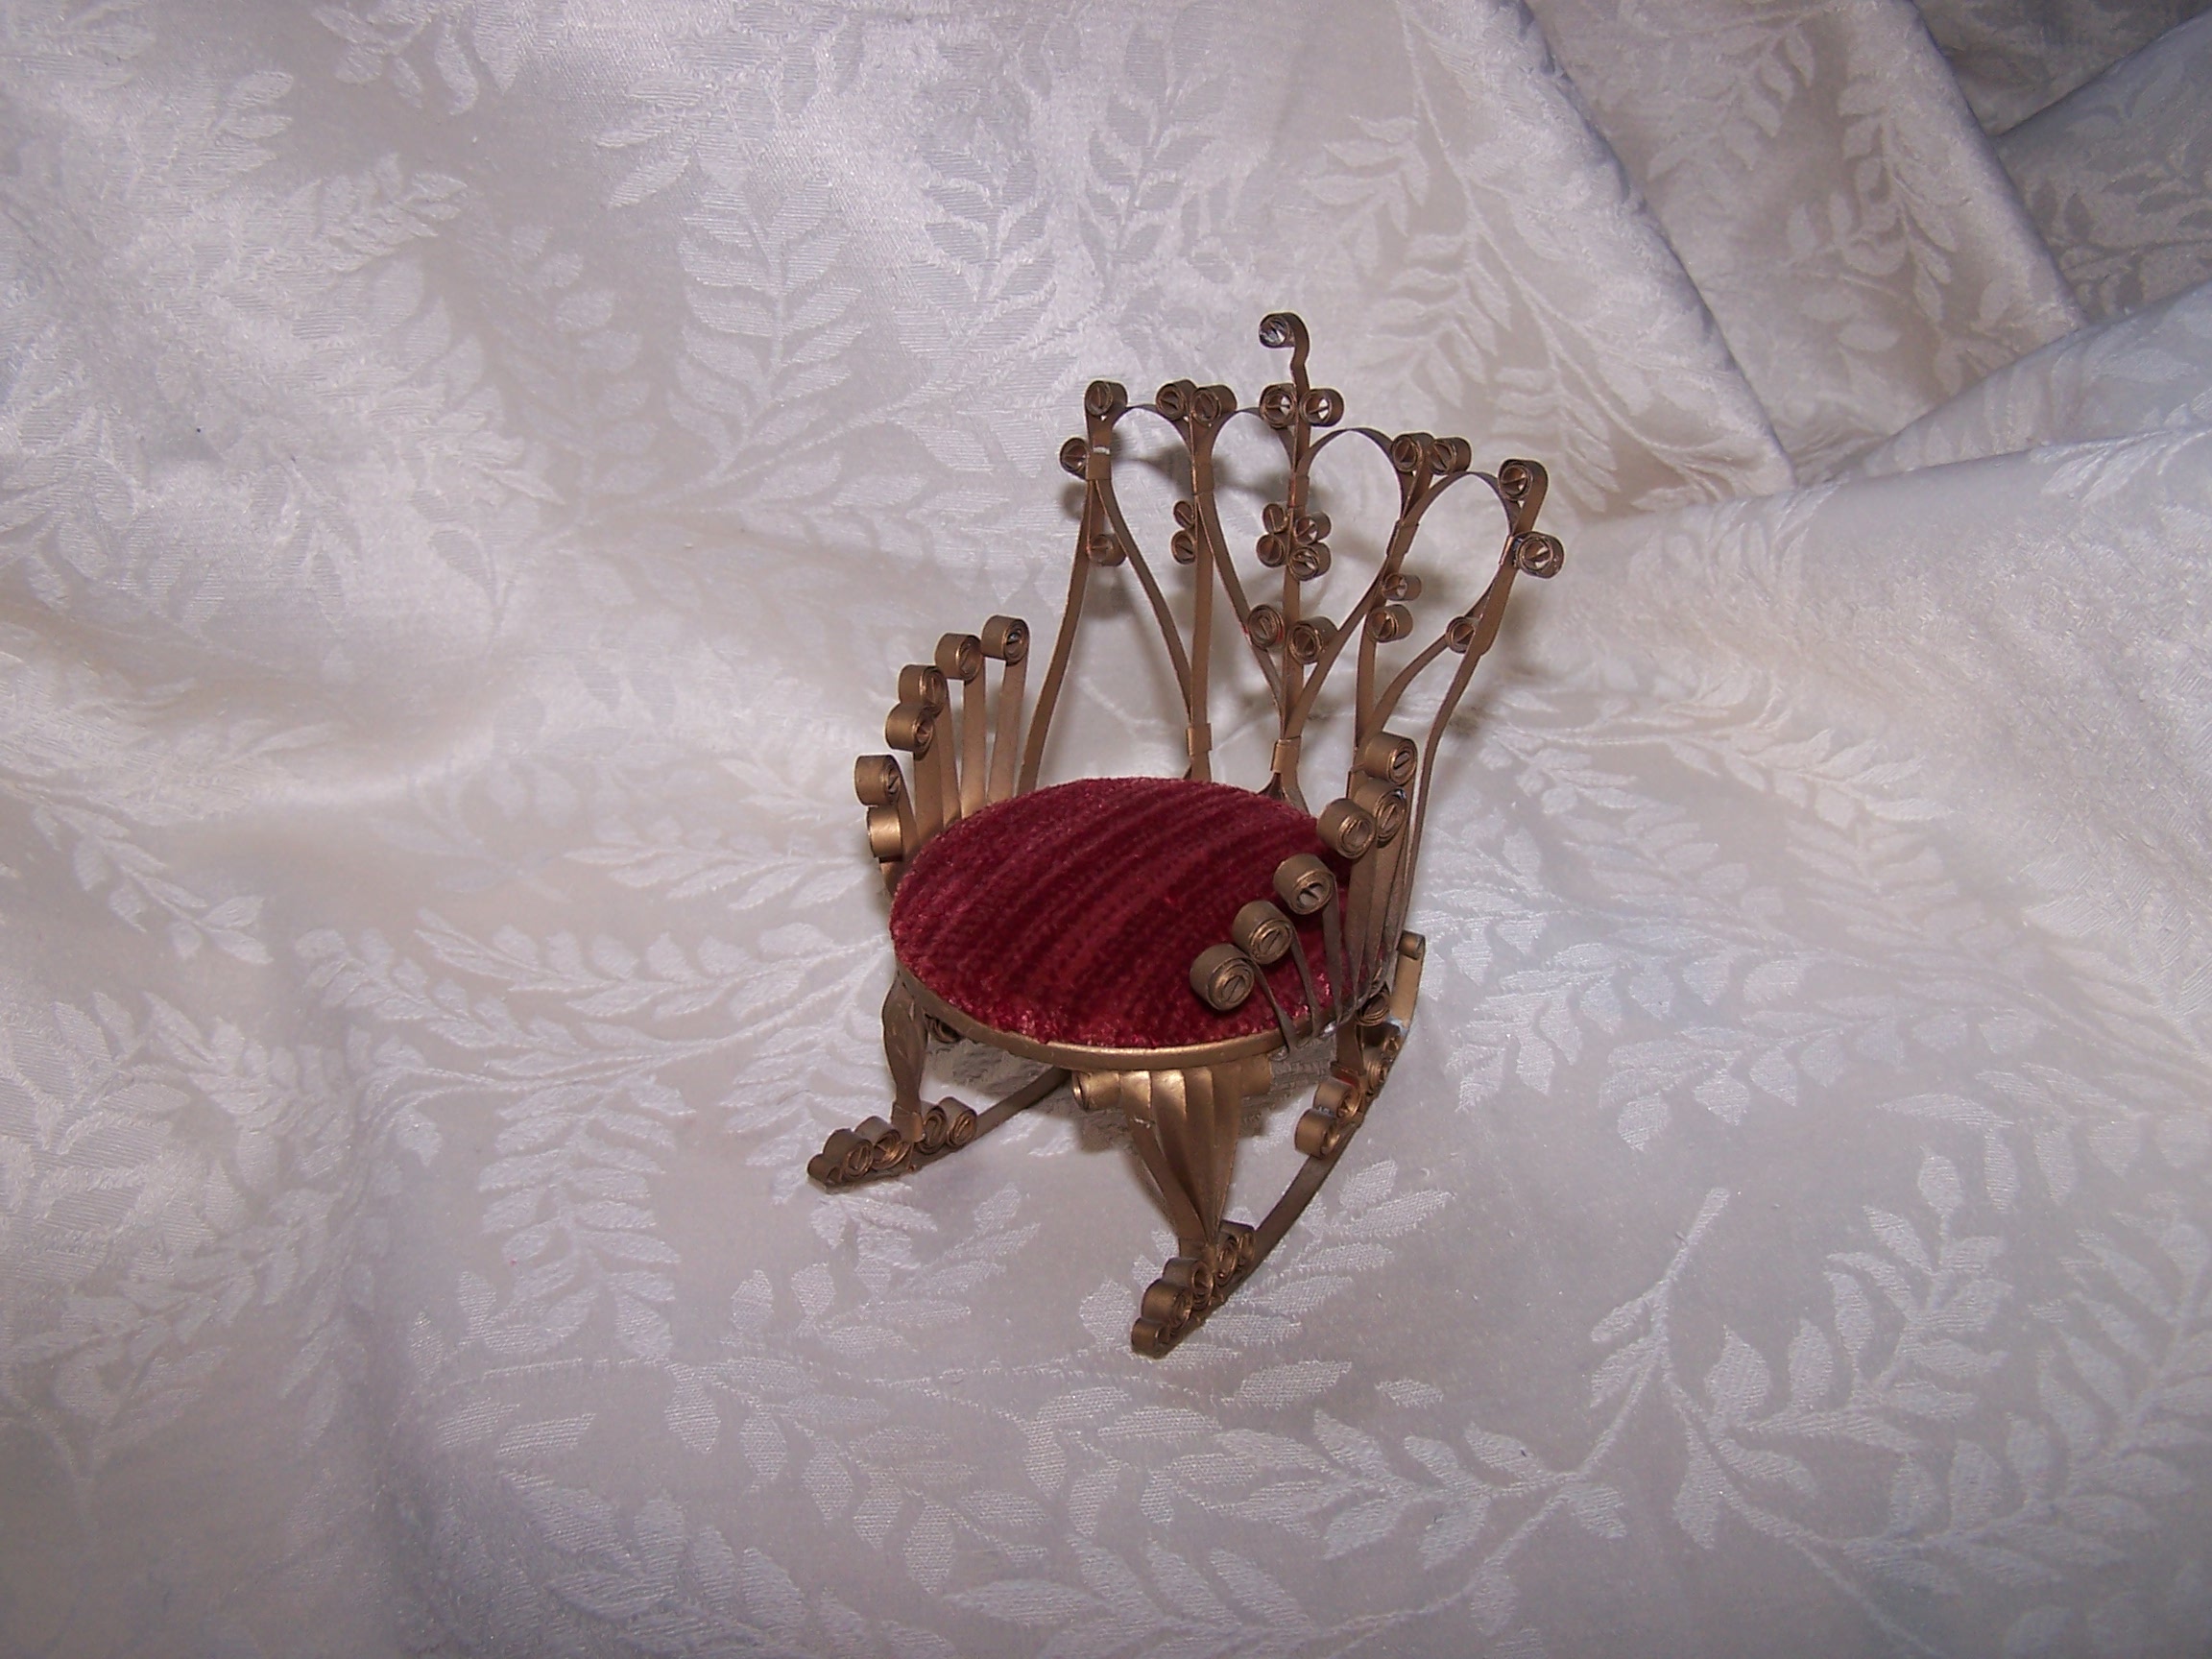 Quilled Pin Cushion Rocking Chair, Gold, Red Plush, Vintage